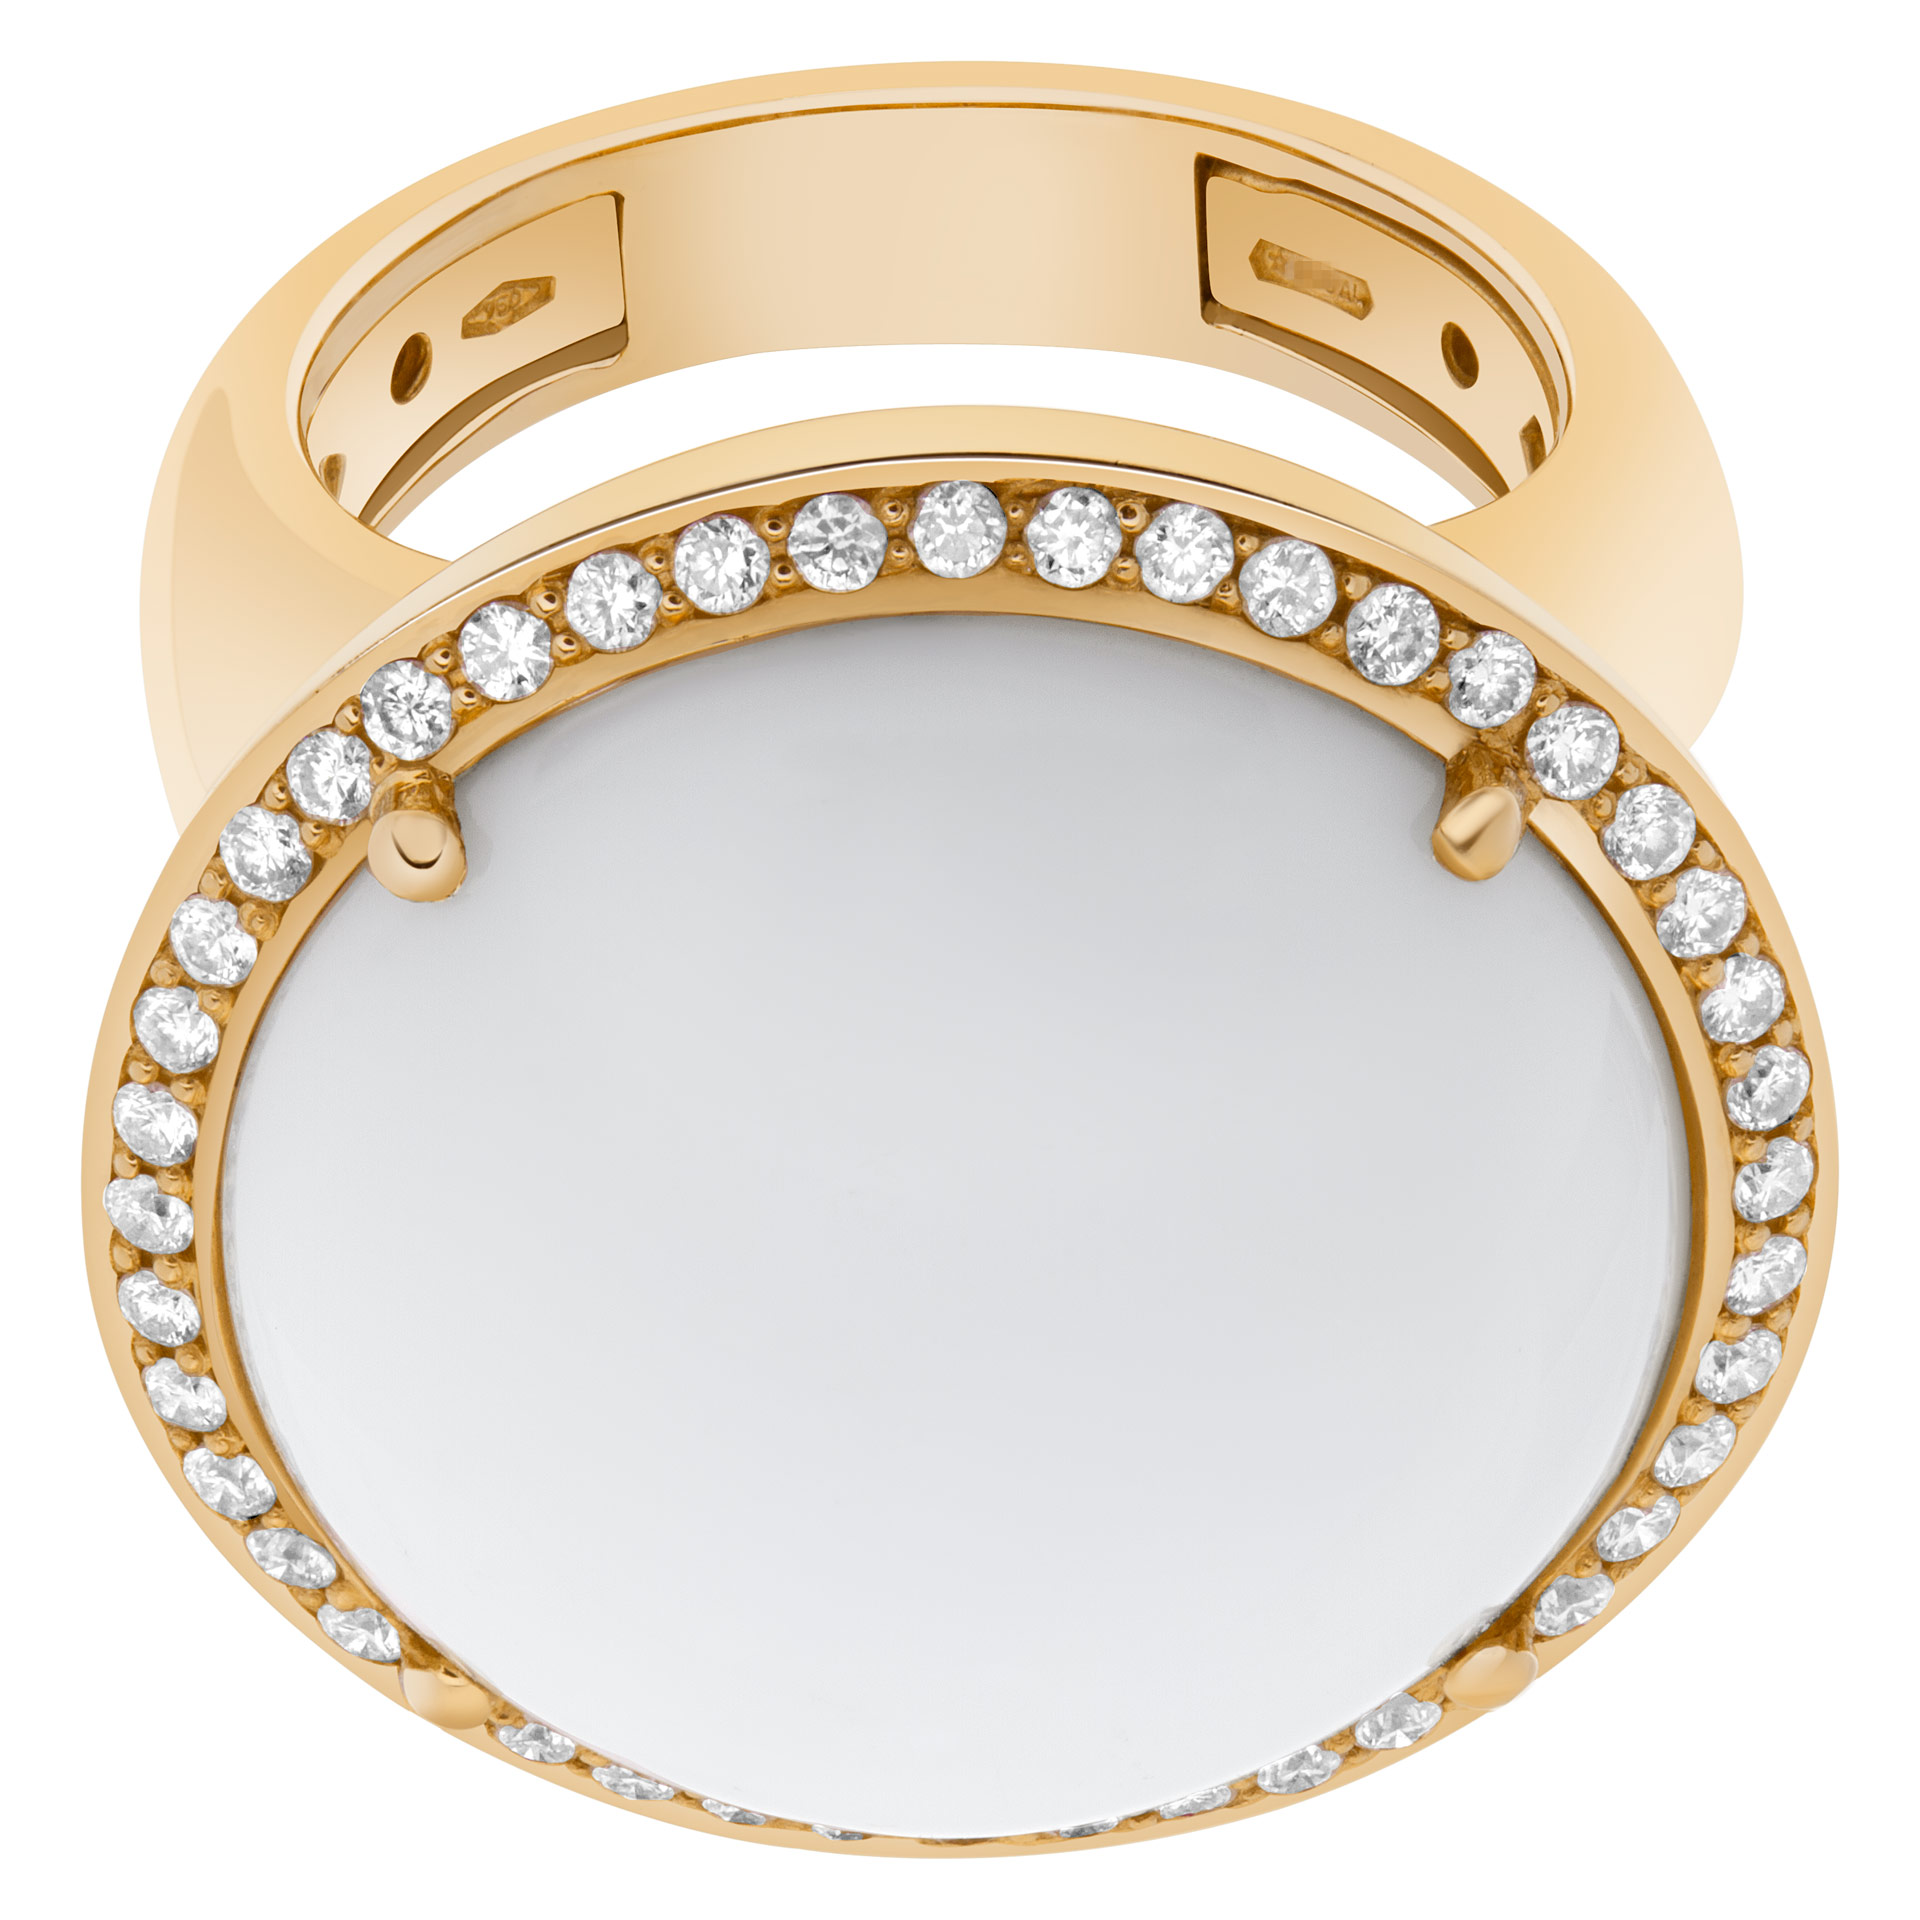 Superbly crafted large white coral cabochon ring with diamonds set in 18k rose gold.